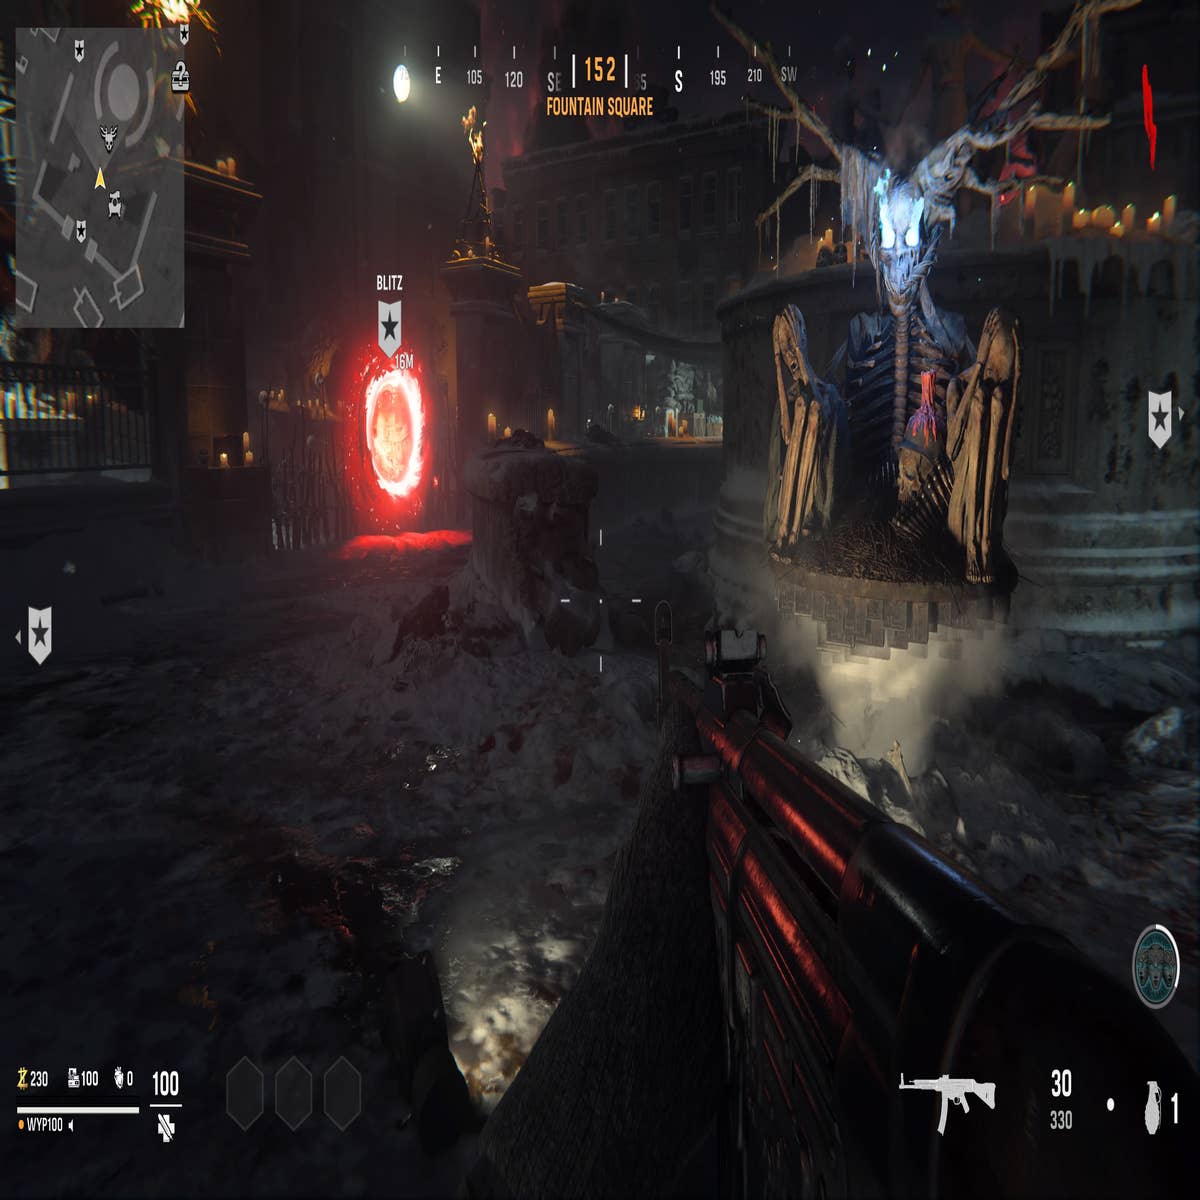 Call of Duty: Vanguard review – a personal war